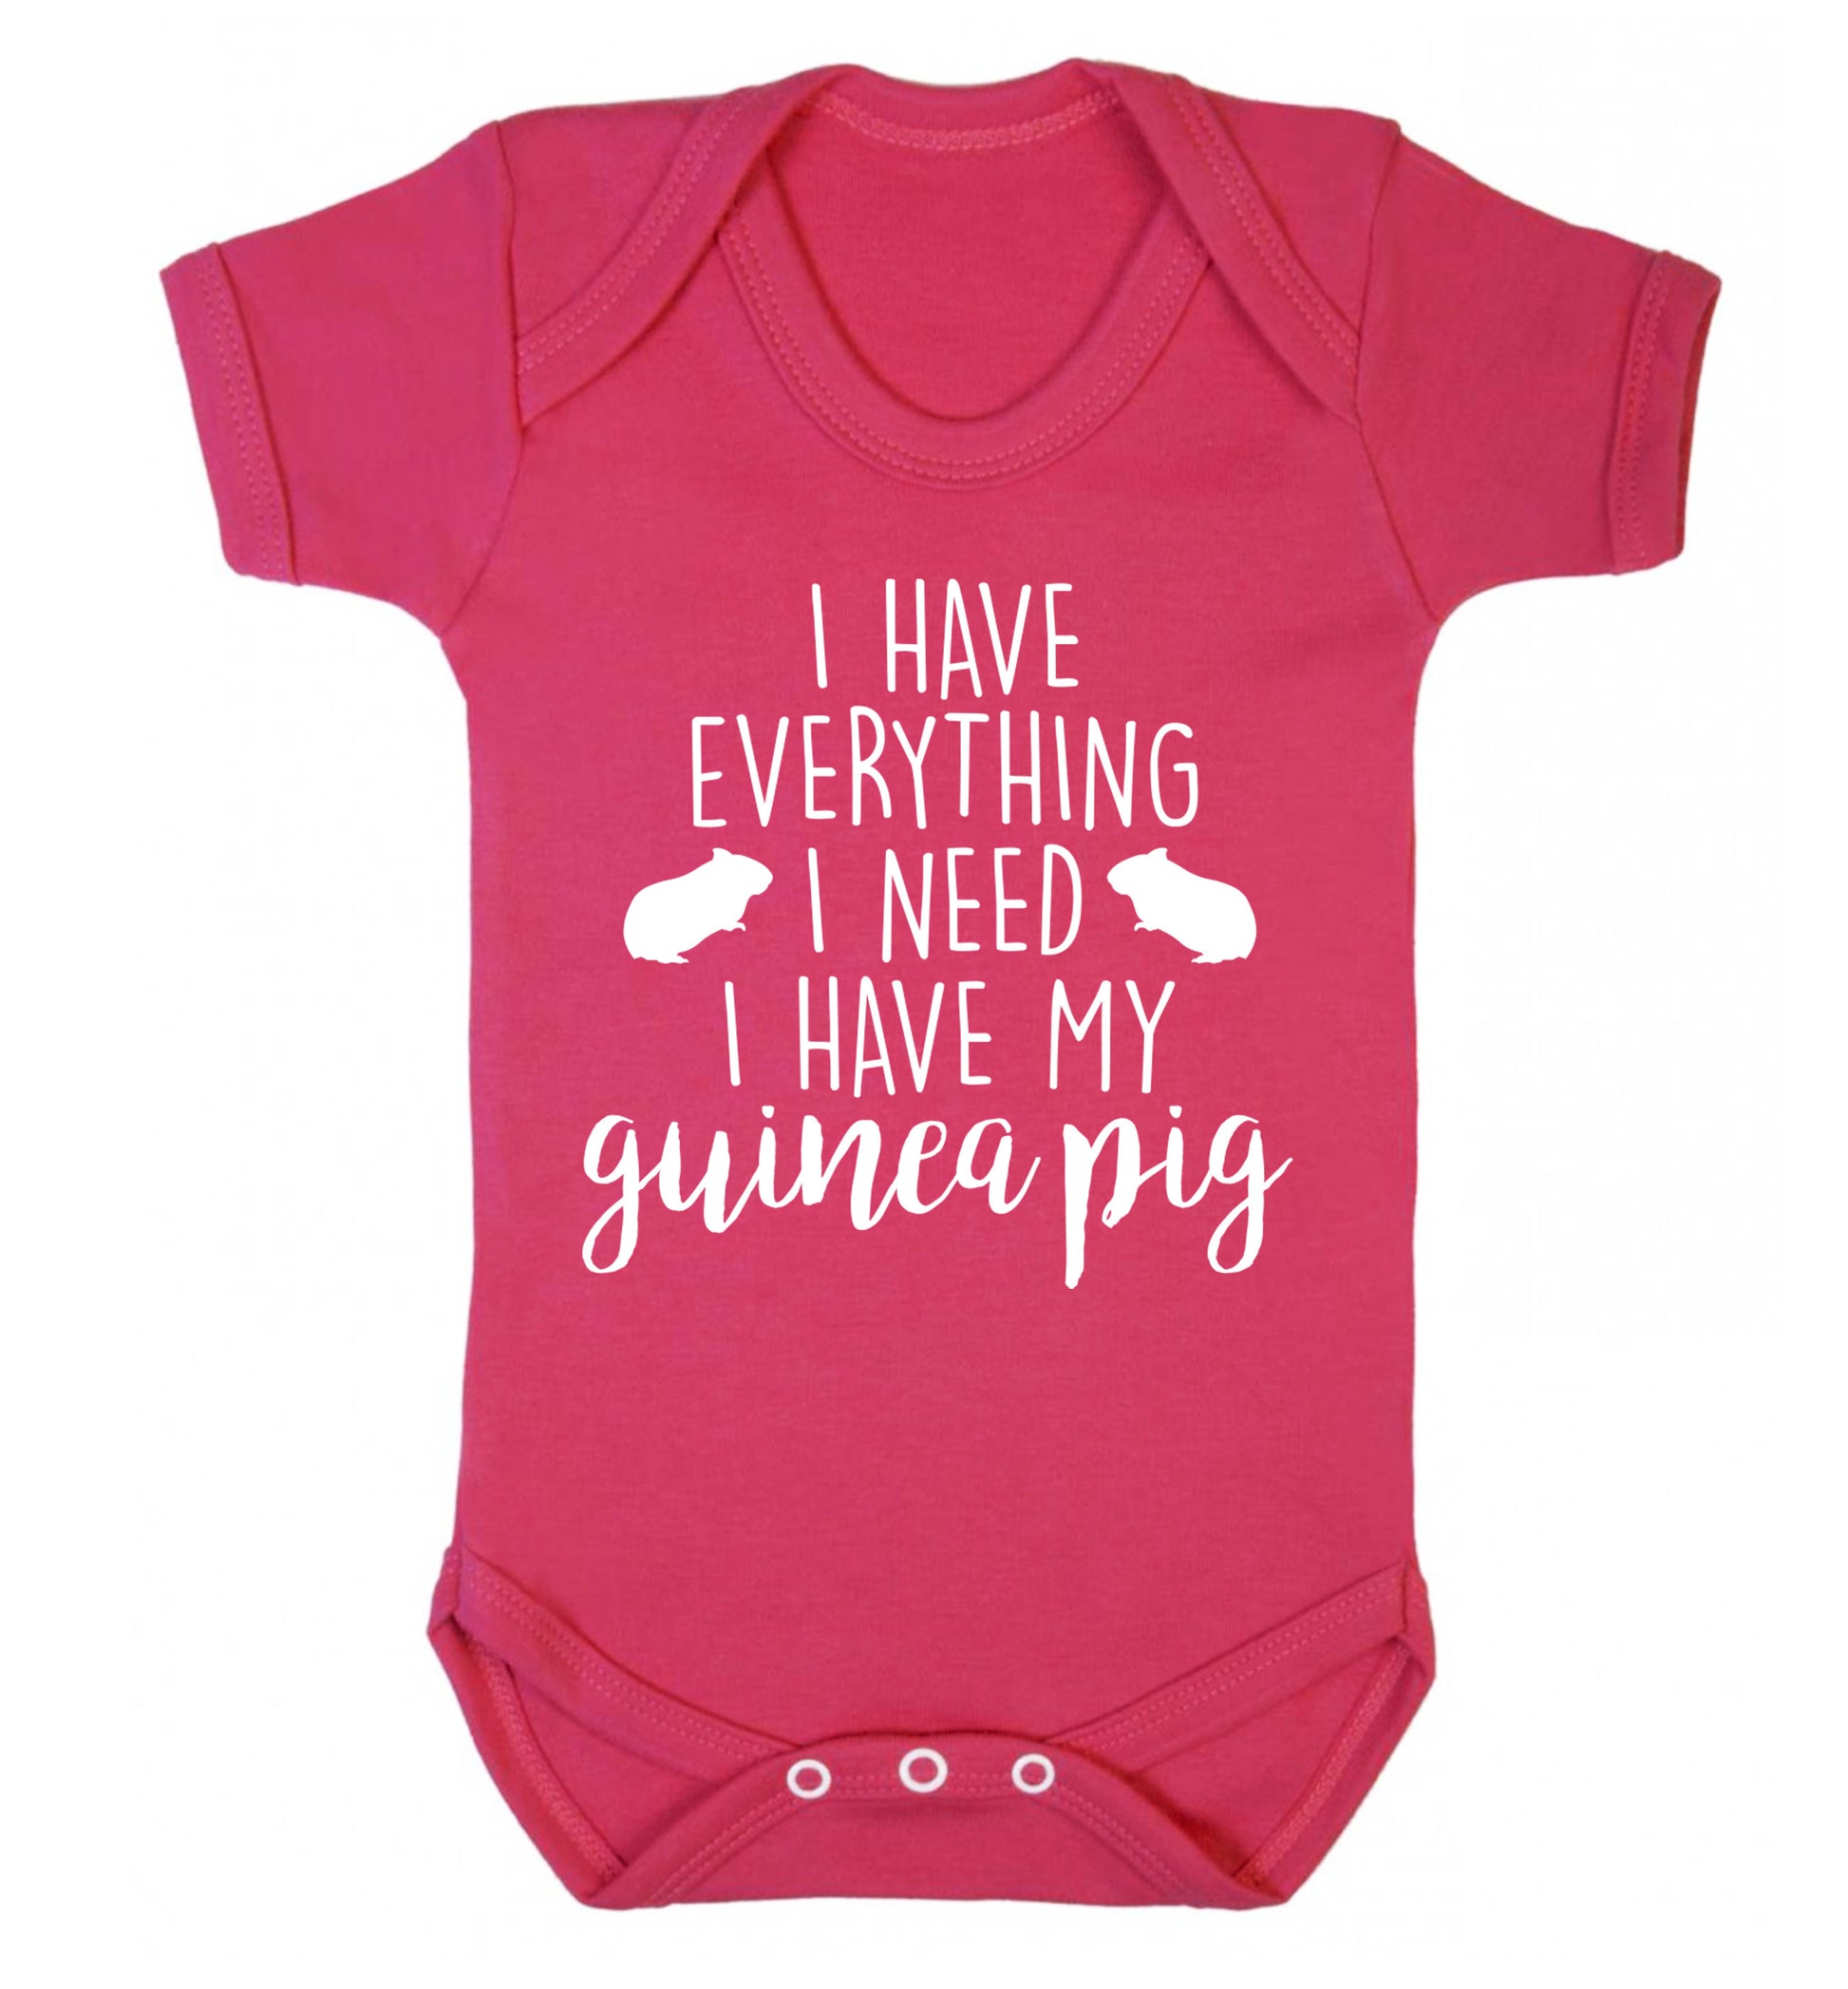 I have everything I need, I have my guinea pig Baby Vest dark pink 18-24 months